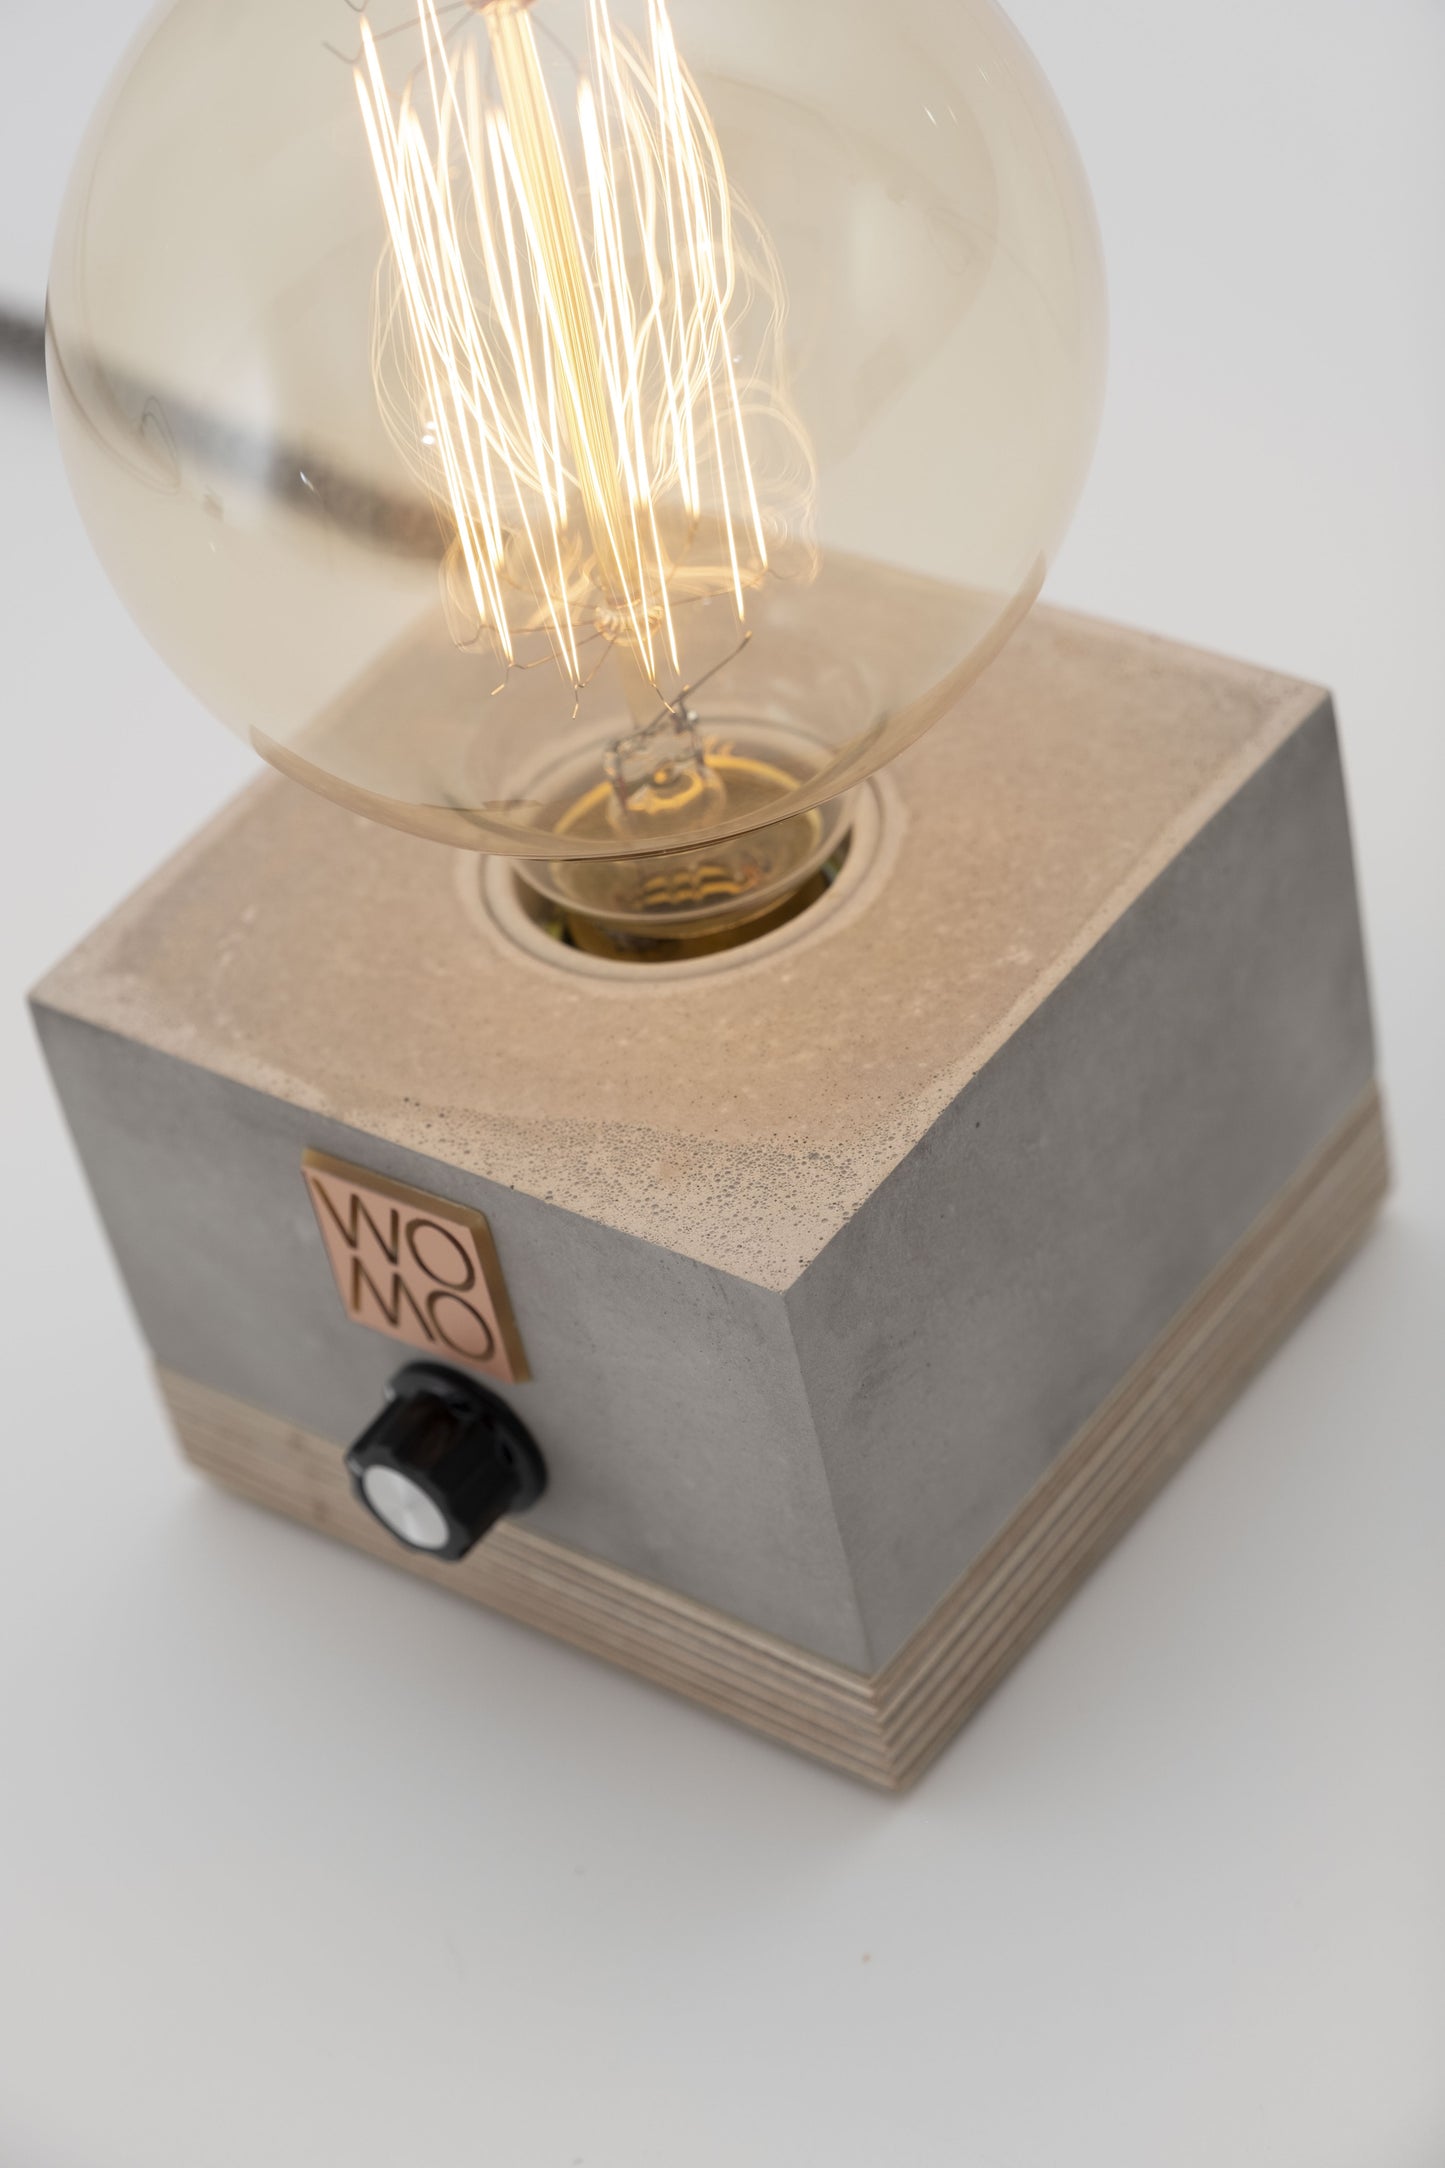 Concrete Table Lamp with Dimmer - Globe